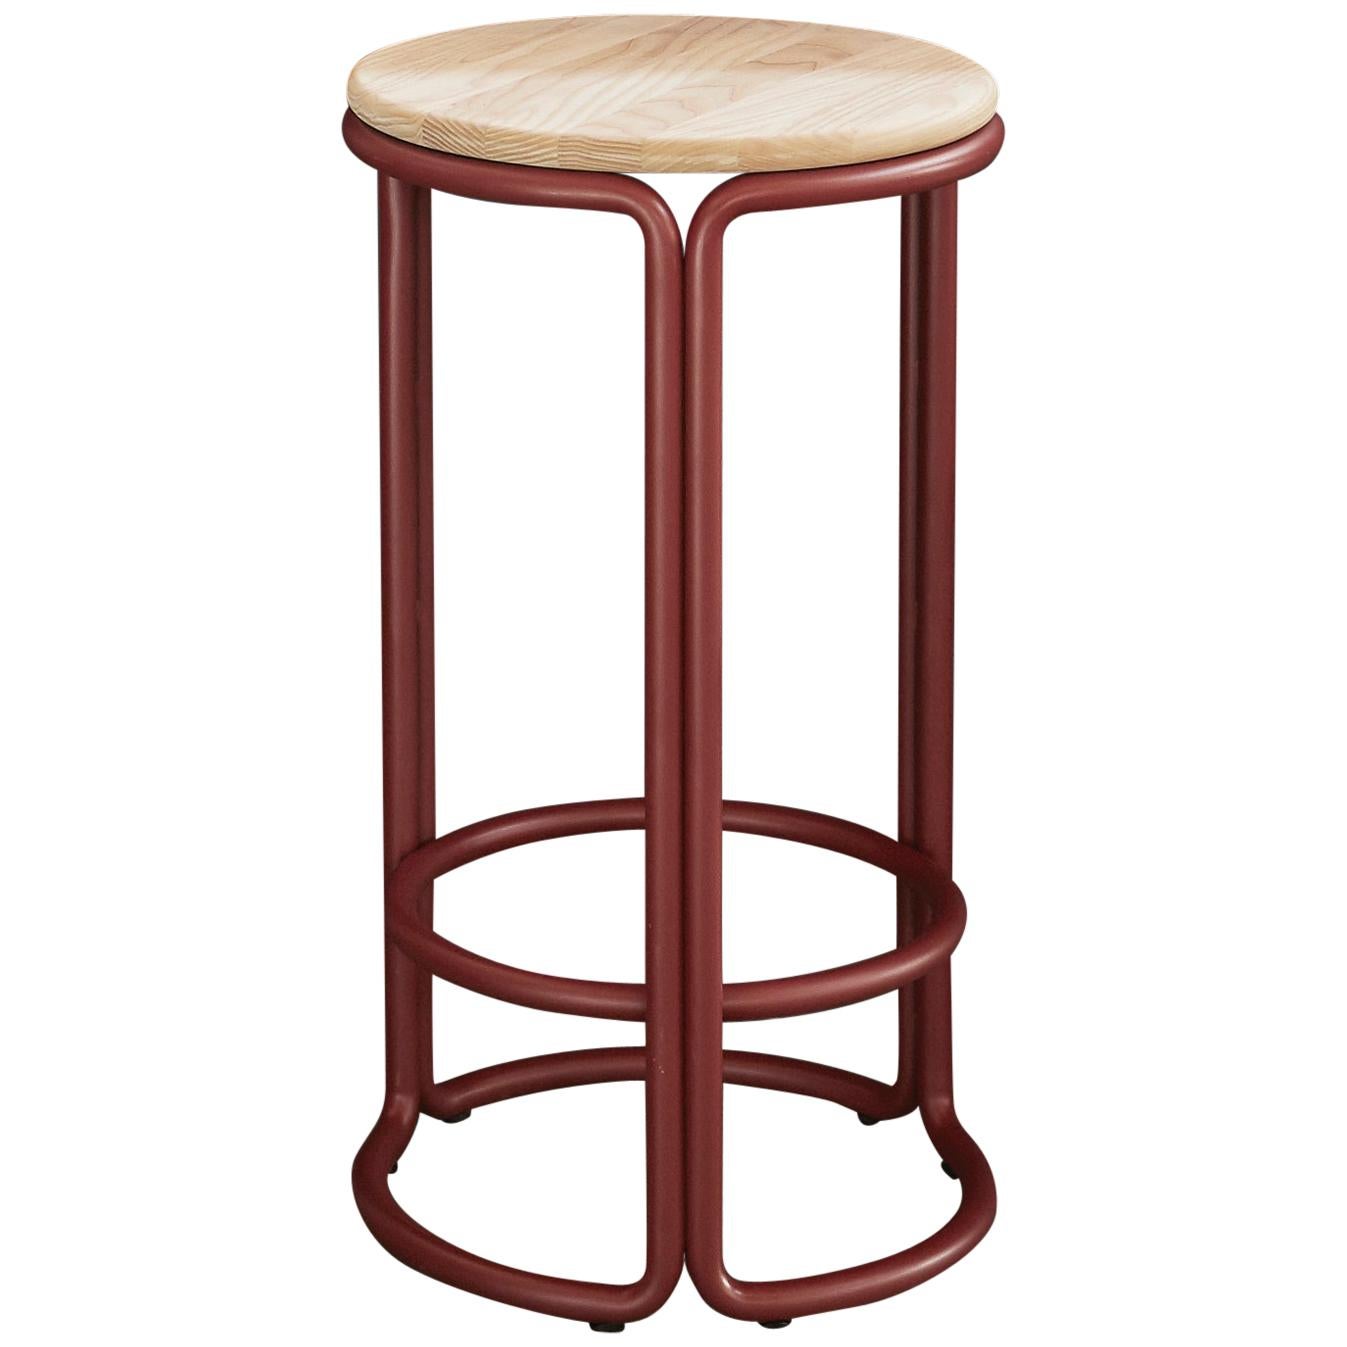 Hardie Wood Counter Stool with Wood Seat and Basque Red Steel Frame